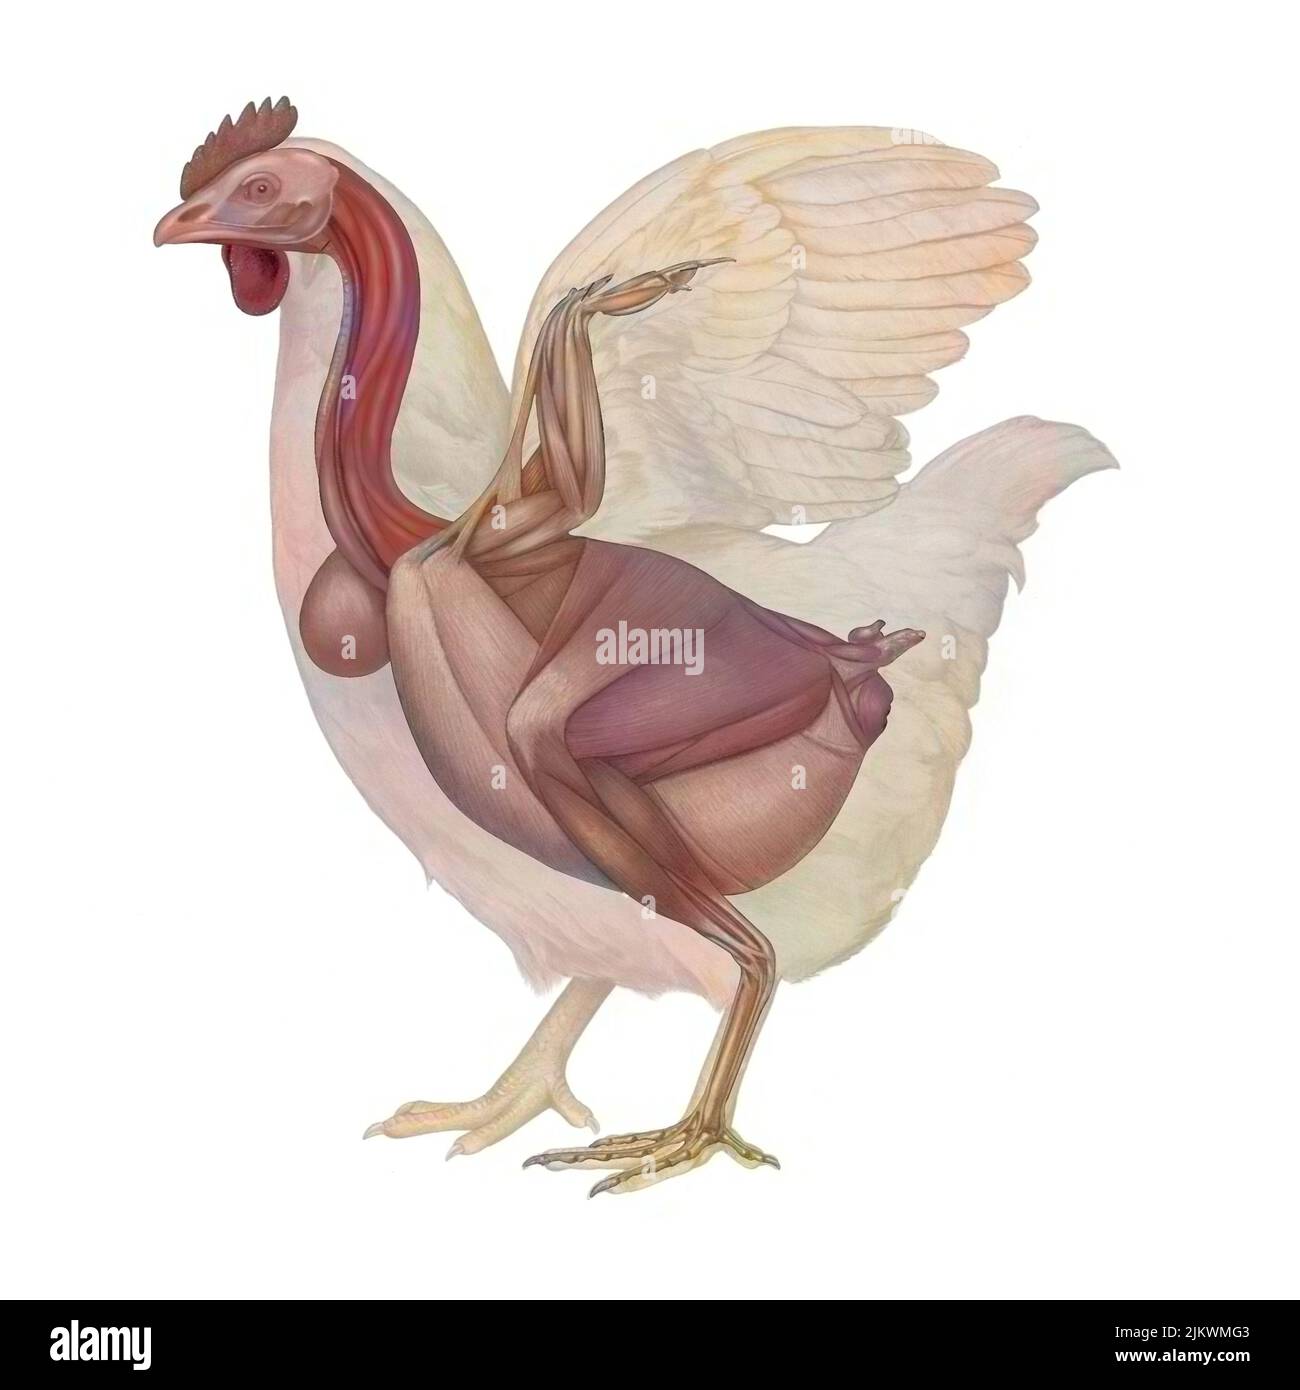 Chicken anatomy with its muscular system. Stock Photo